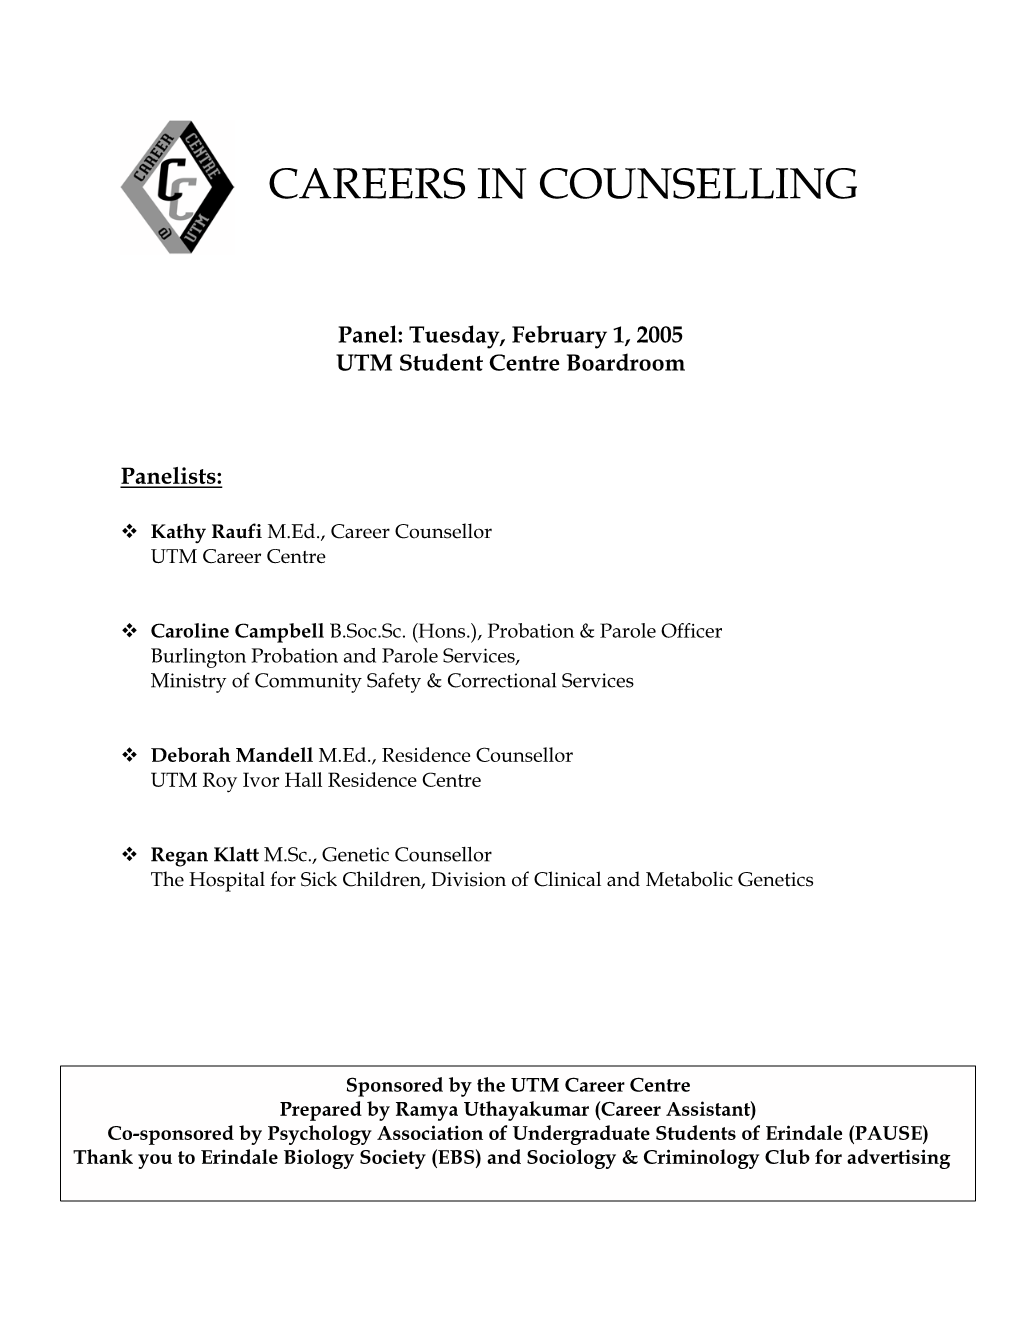 Careers in Counselling